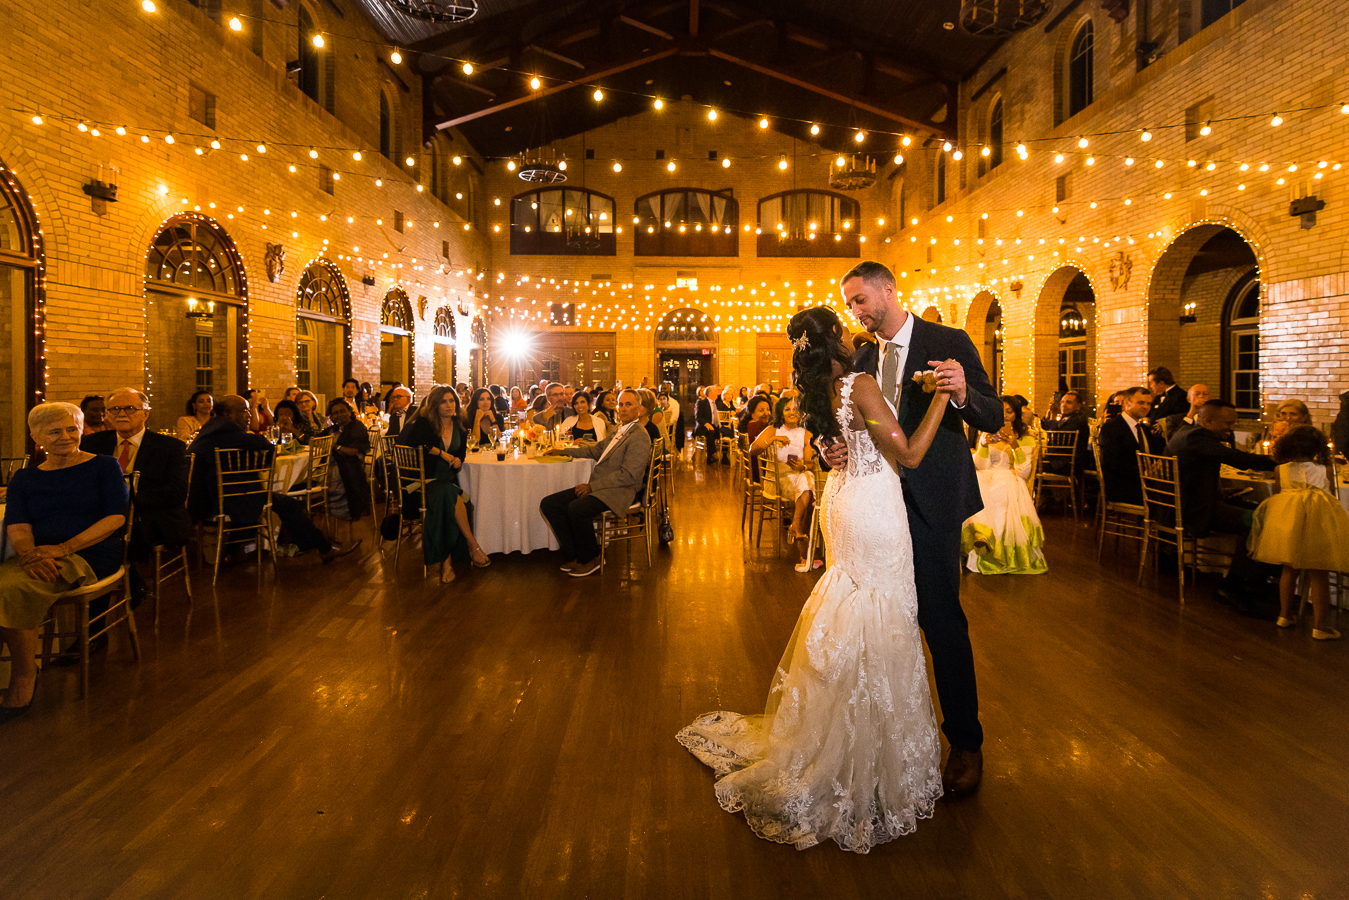 st francis hall wedding photographer, lisa rhinehart, captures this image of the bride and groom as they share their first dance together during their wedding reception in Washington dc